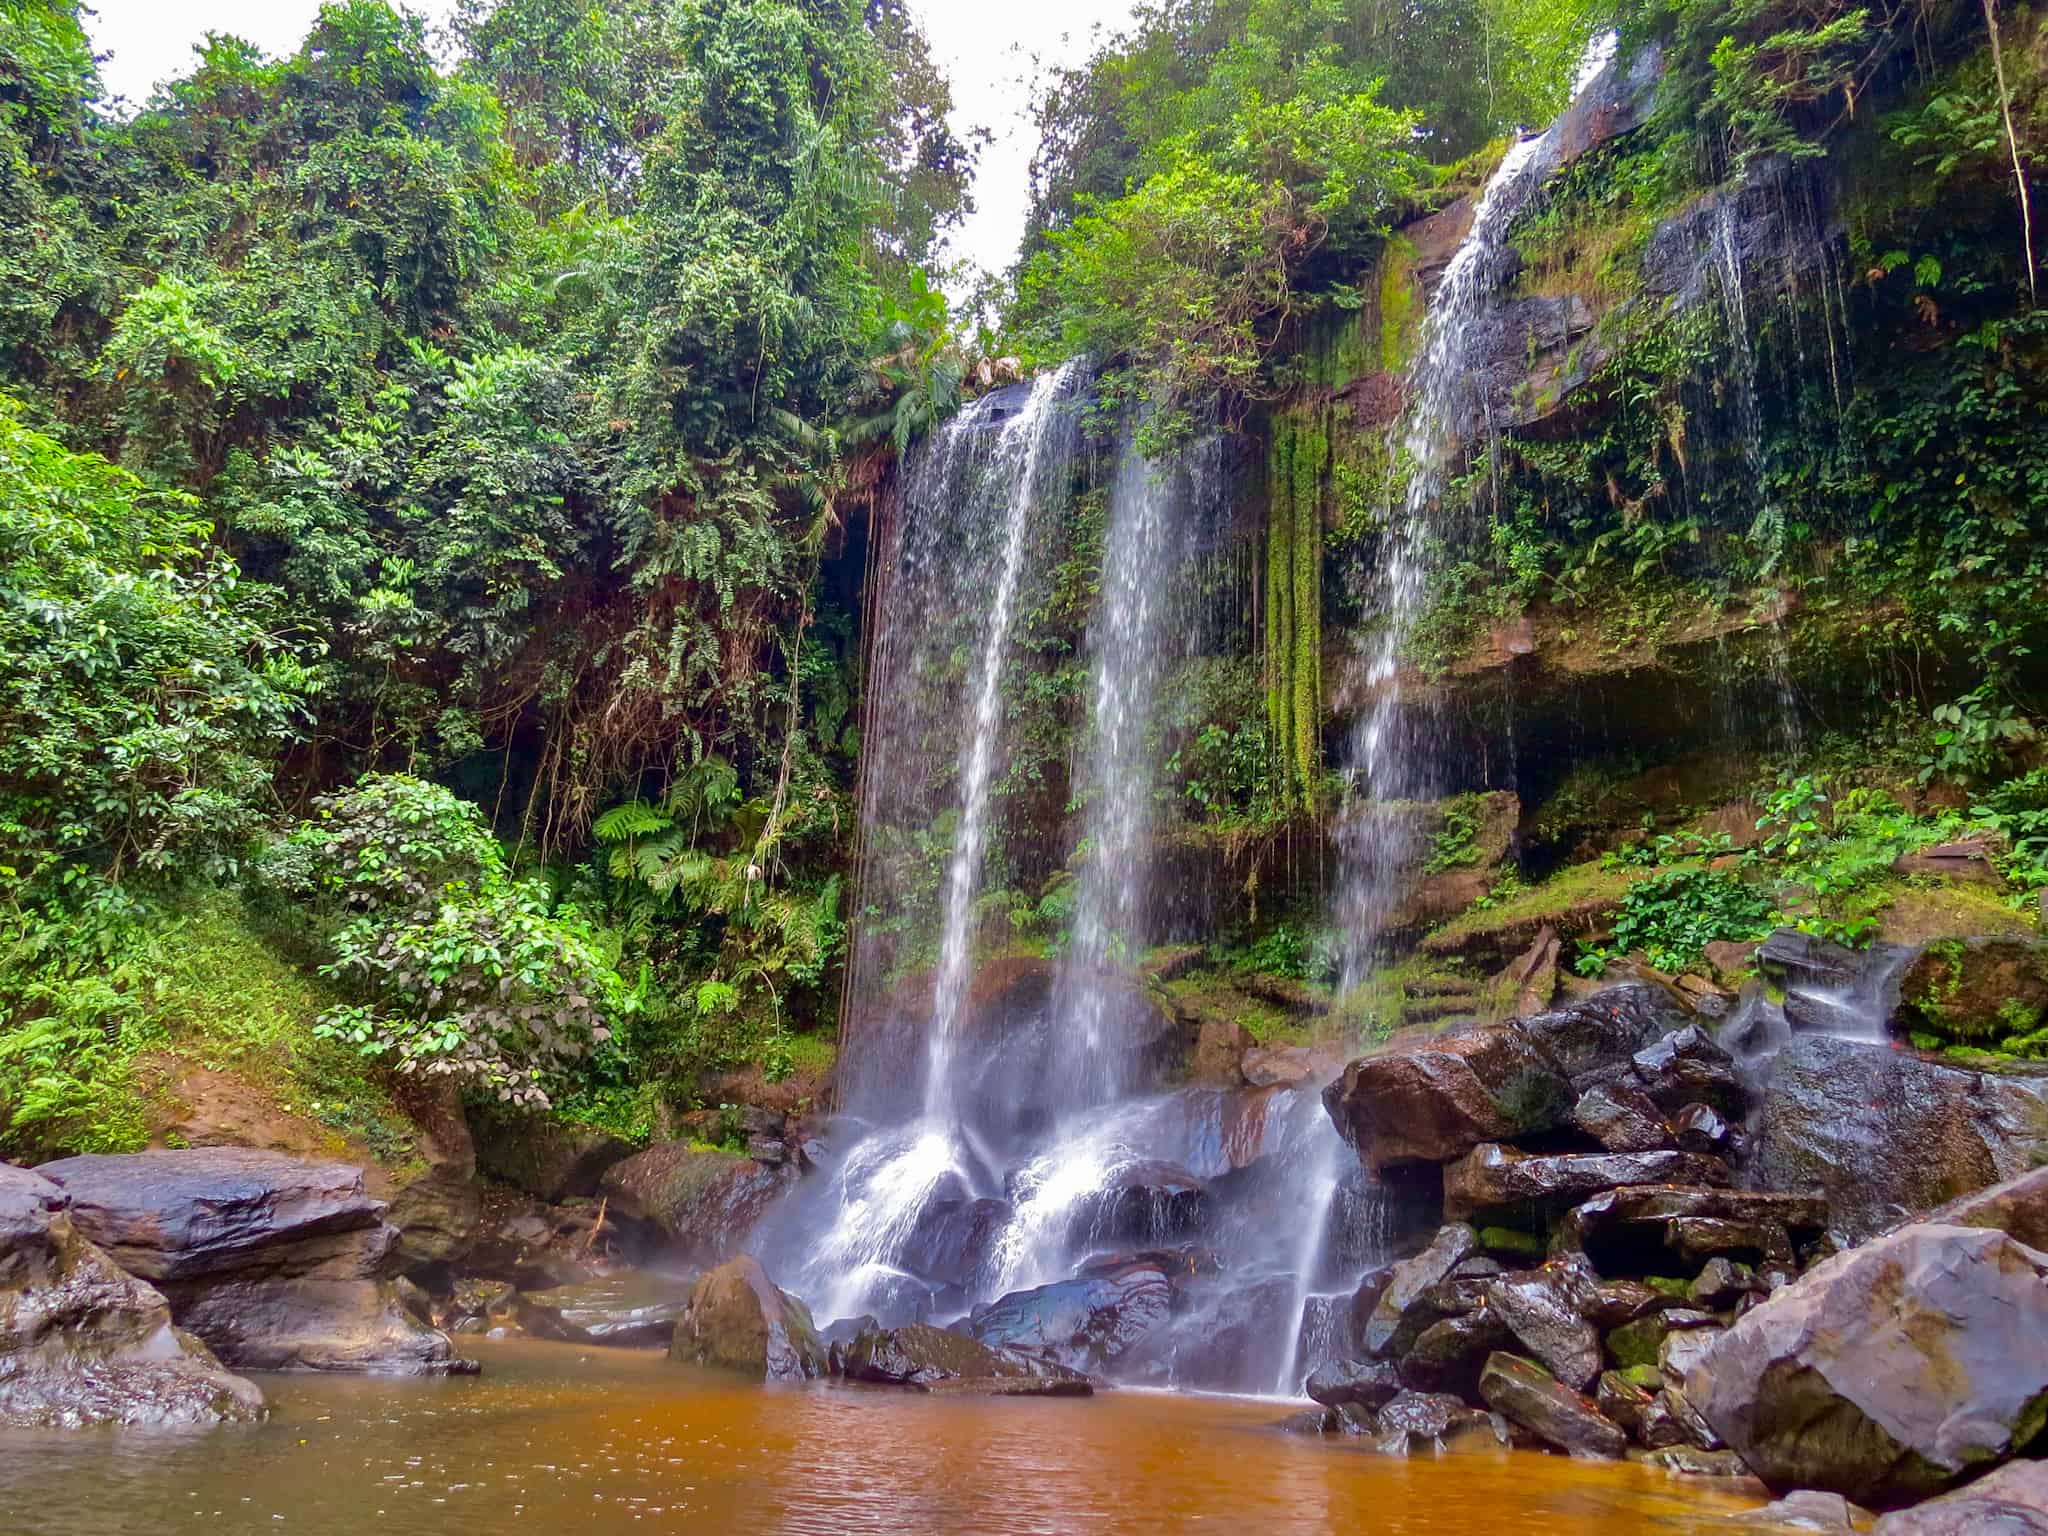 Kulen waterfall at Phnom Kulen National Park was one of my favourite things to do in Siem Reap